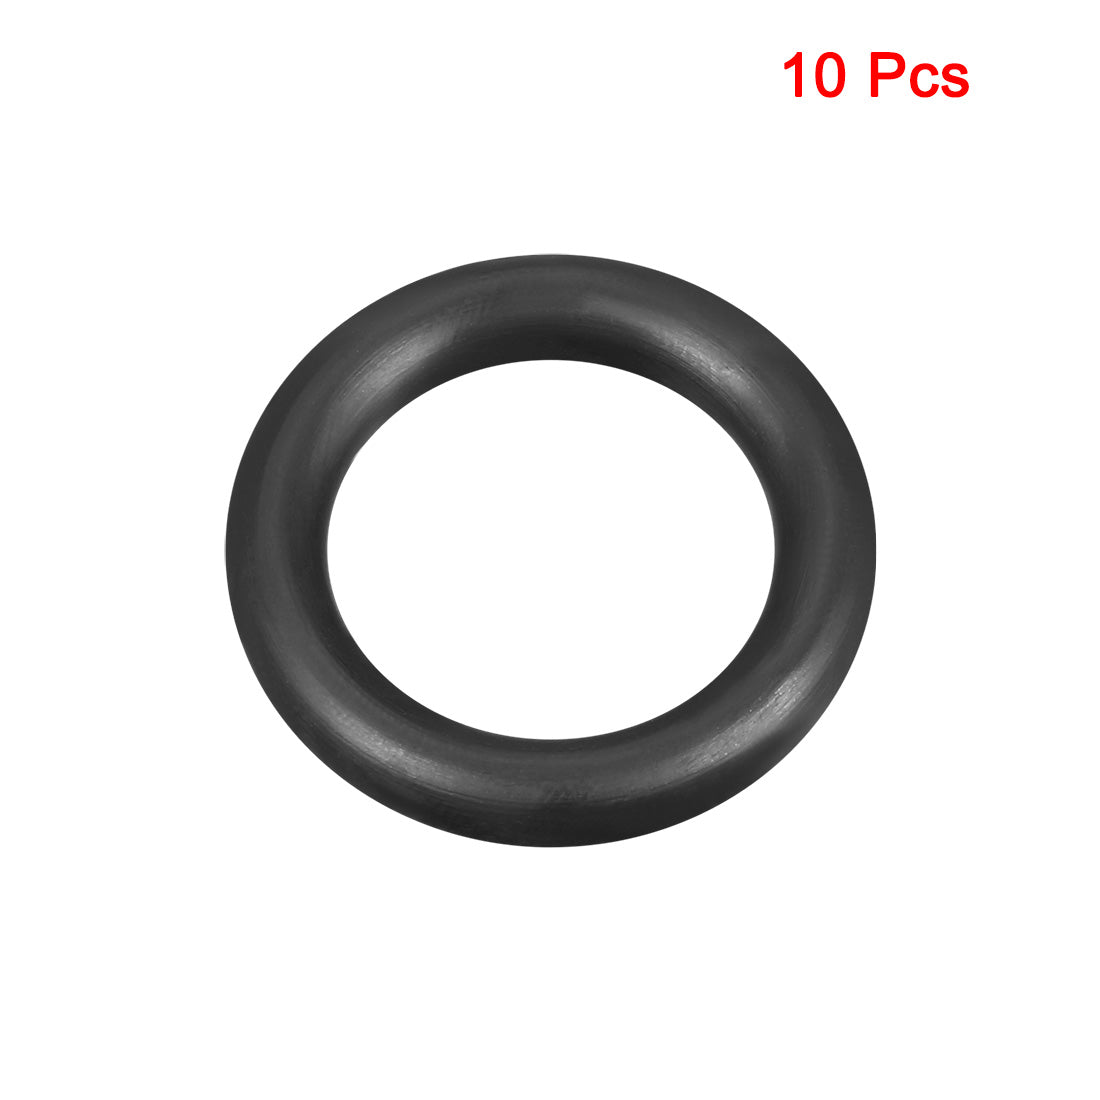 uxcell Uxcell O-Rings Nitrile Rubber 20mm x 30mm x 5mm Seal Rings Sealing Gasket 10pcs